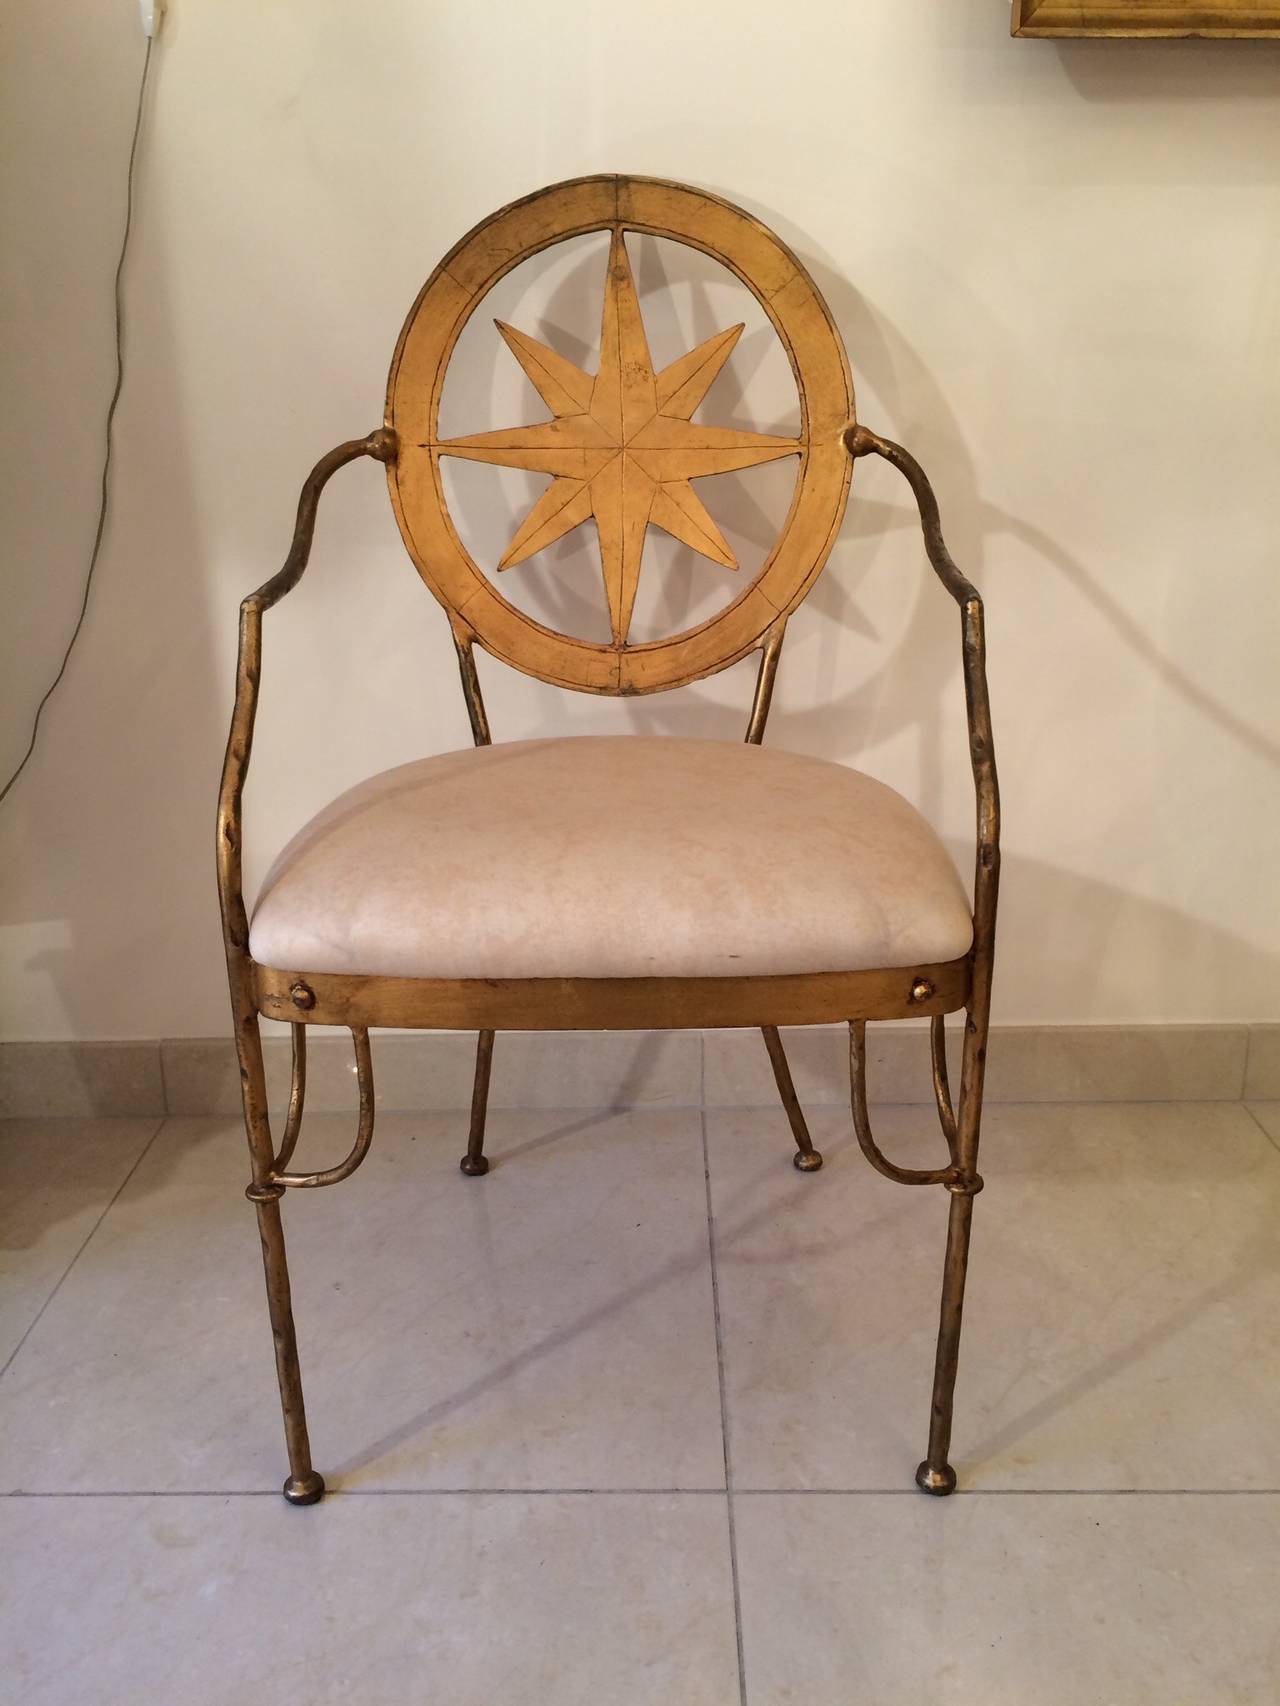 Pair of wrought iron armchairs, gold leaf patina. 
This pair is matching with a set of ten chairs of the same design.